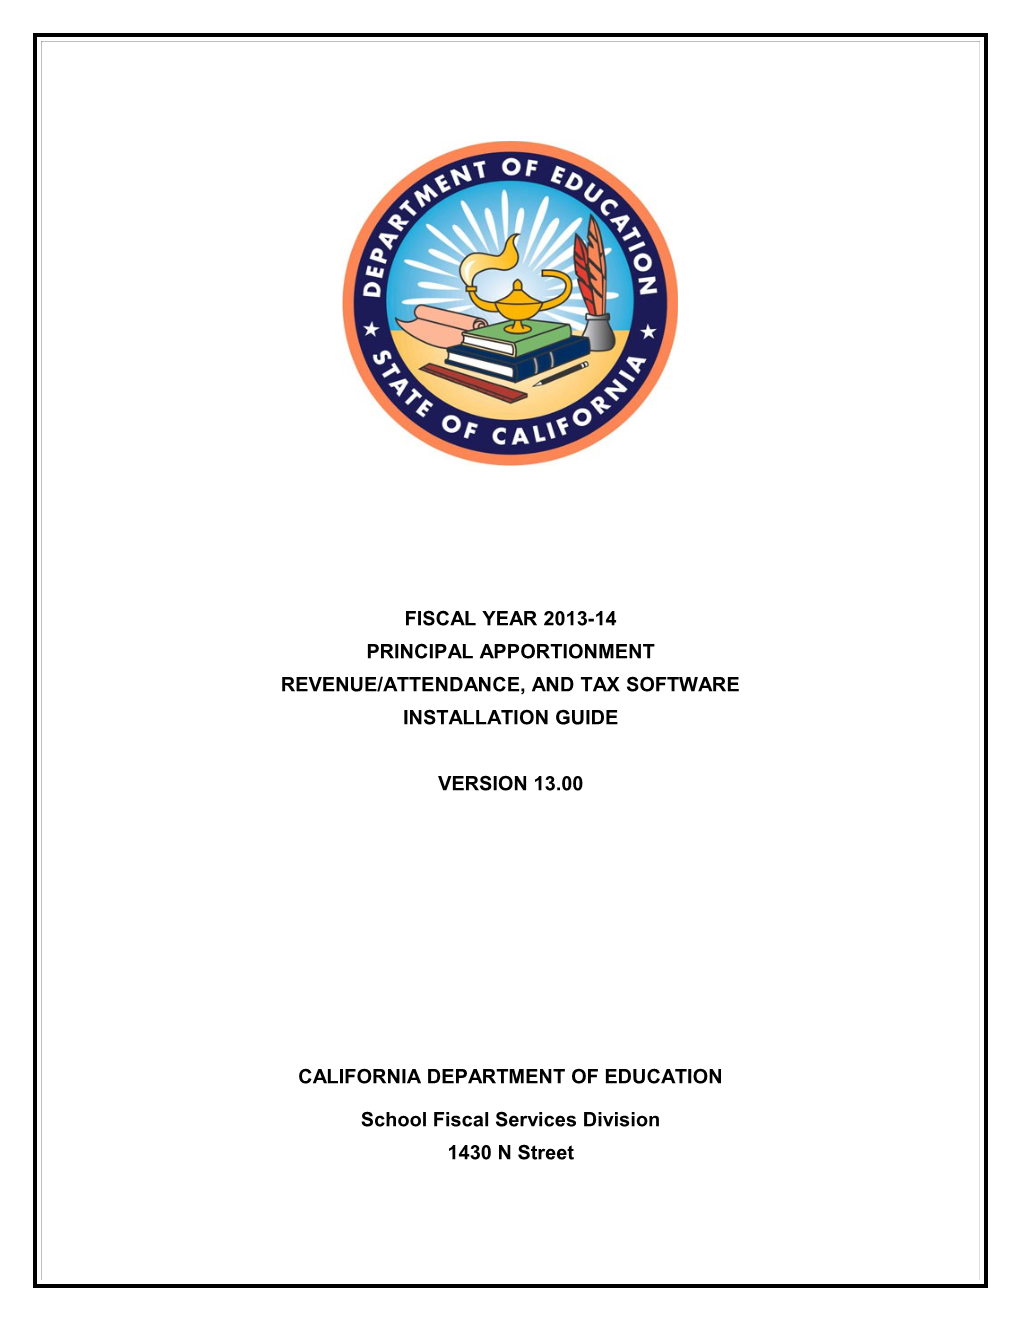 PA Software Install Guide, FY 2013-14 - Principal Apportionment (CA Dept of Education)